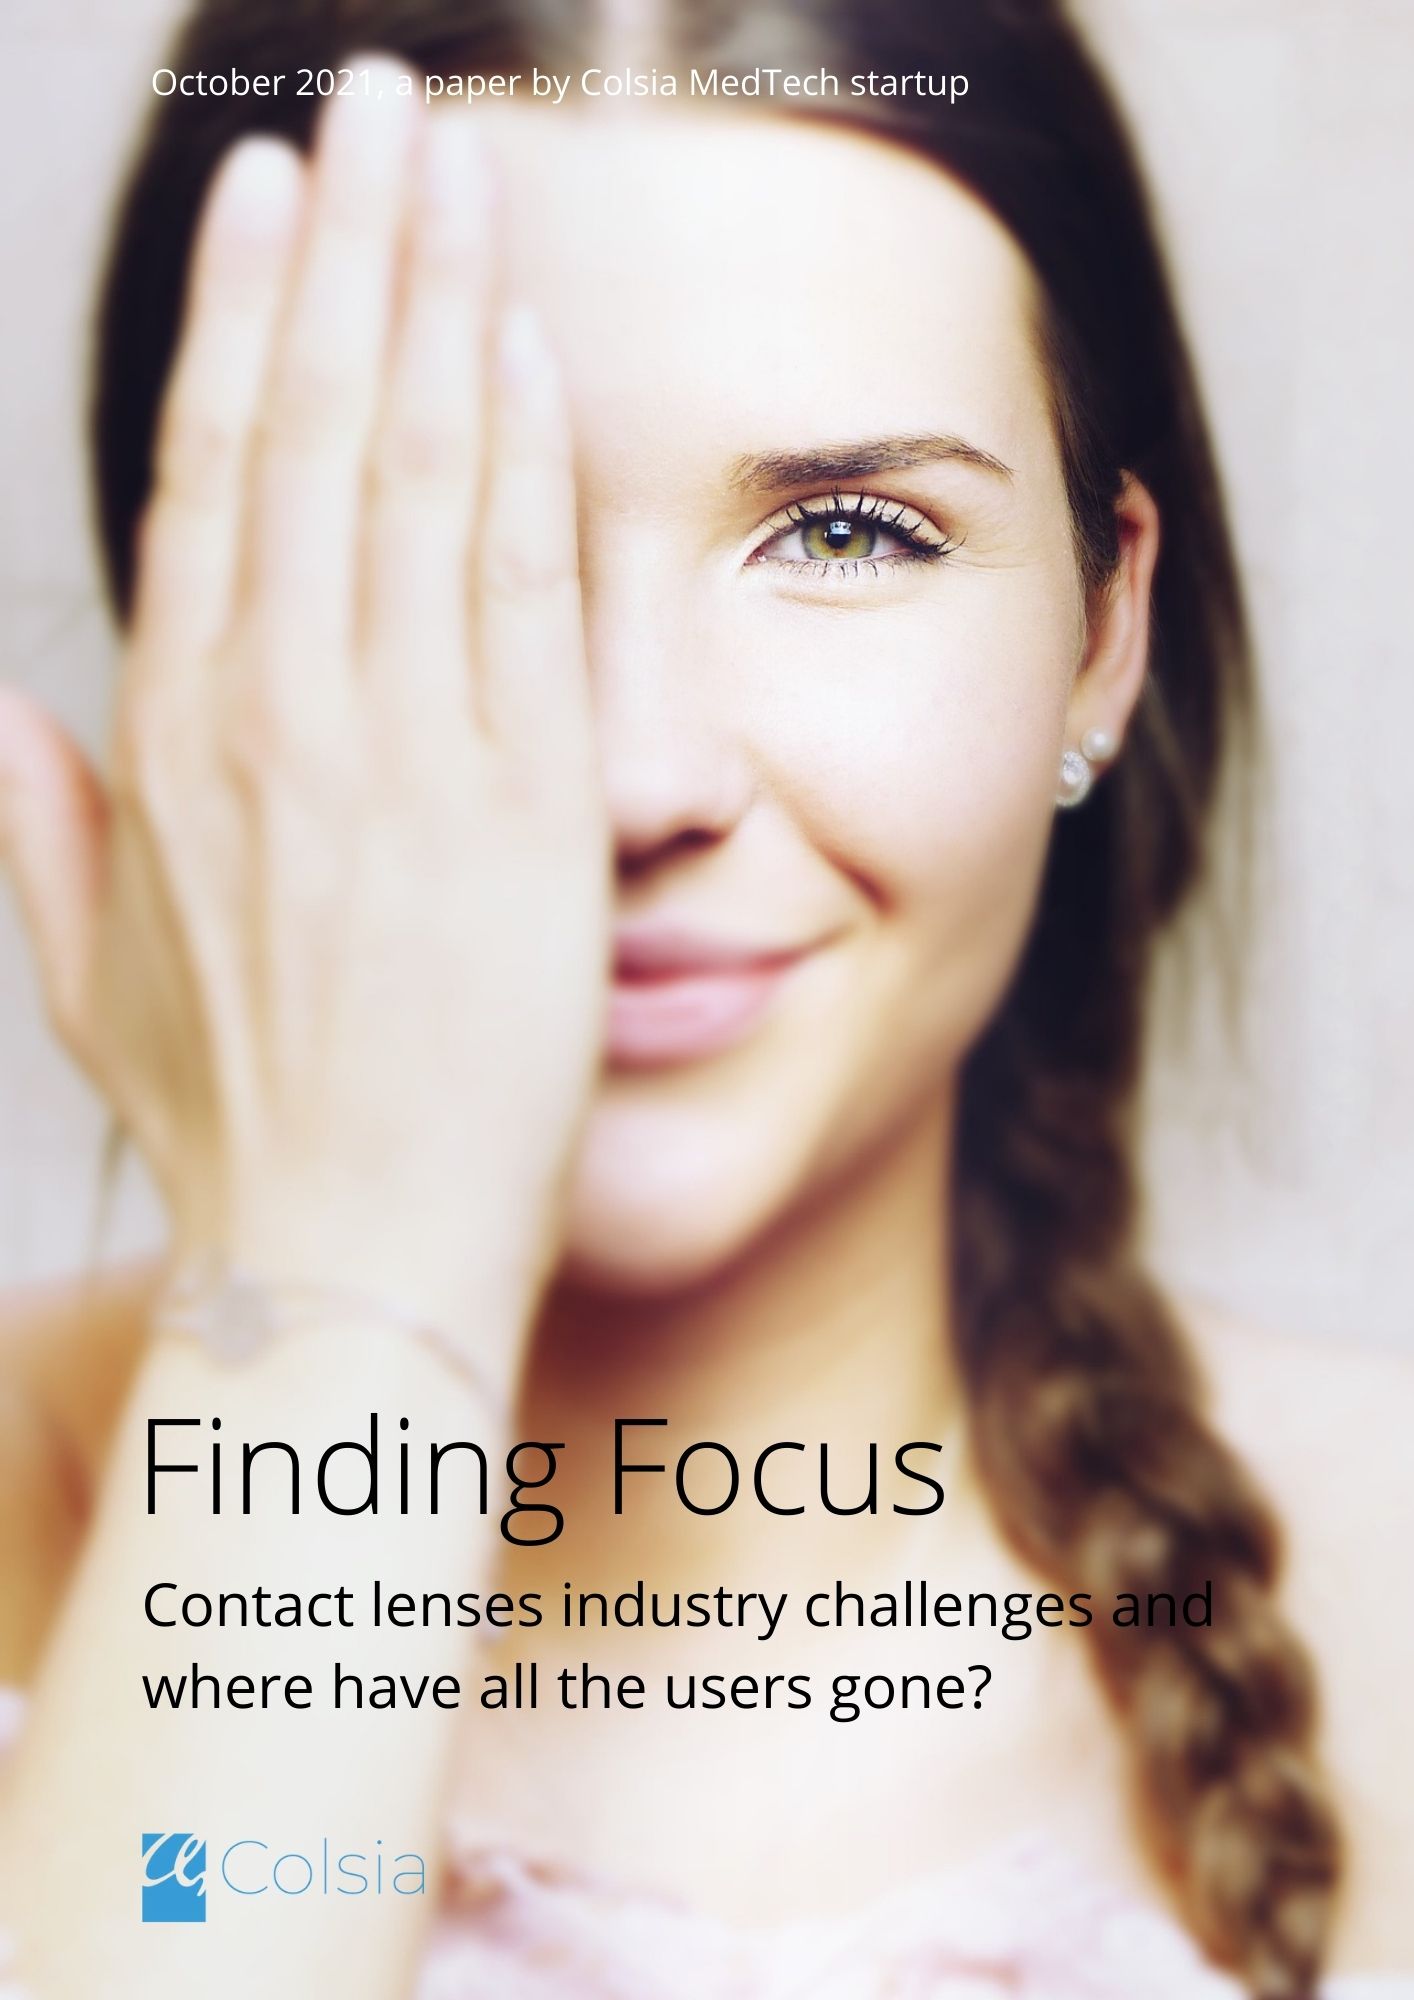 Finding Focus, Magazine for contact lens users